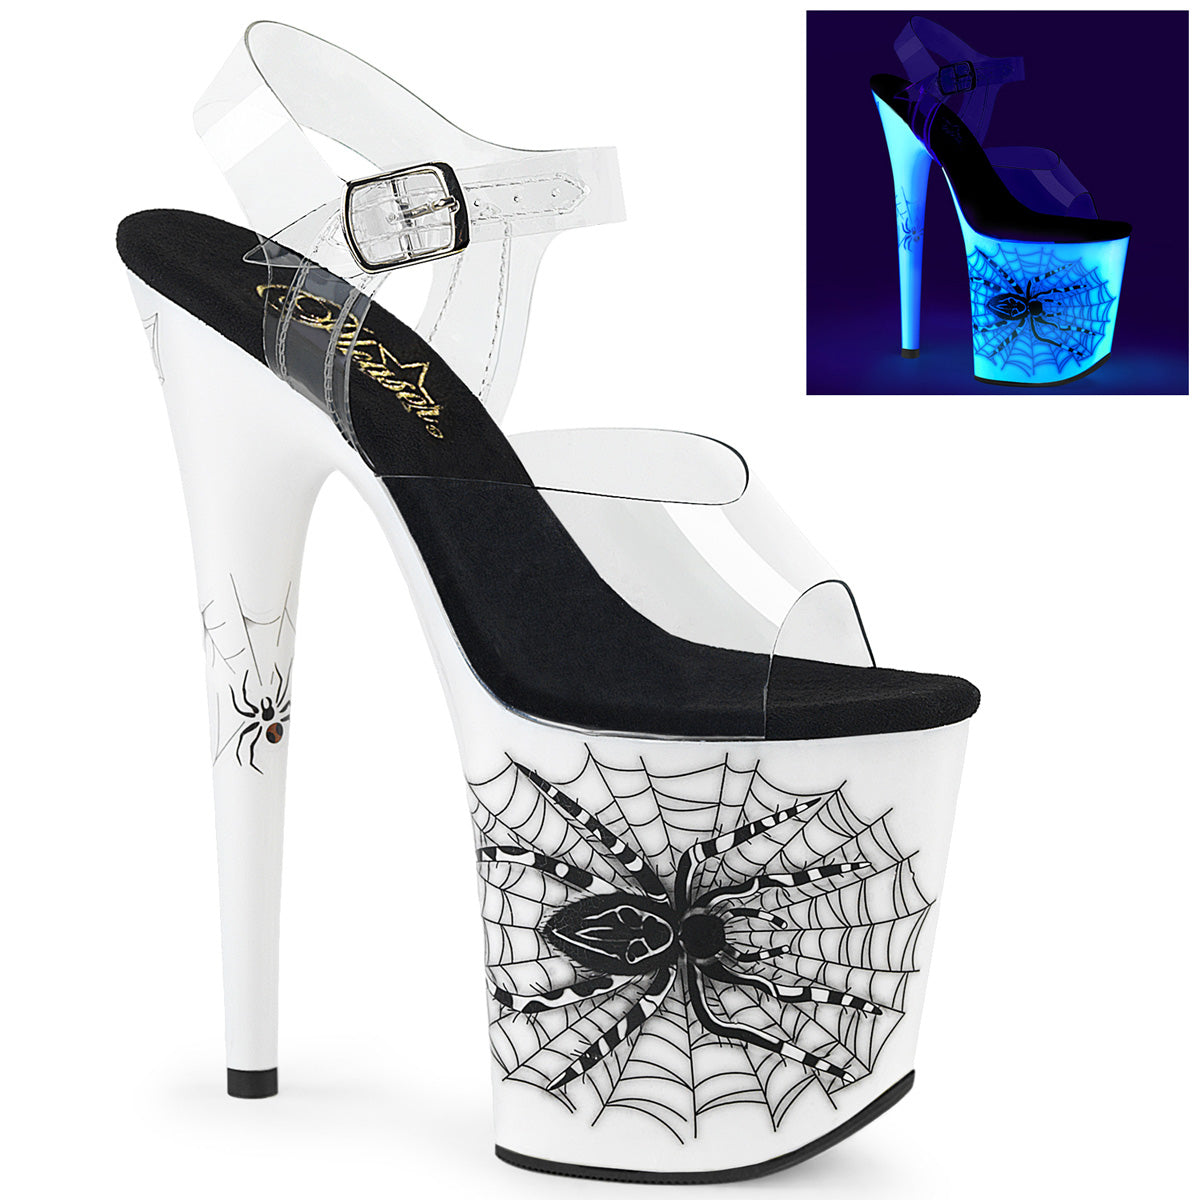 Neon Clear high heels sandals for| Alibaba.com